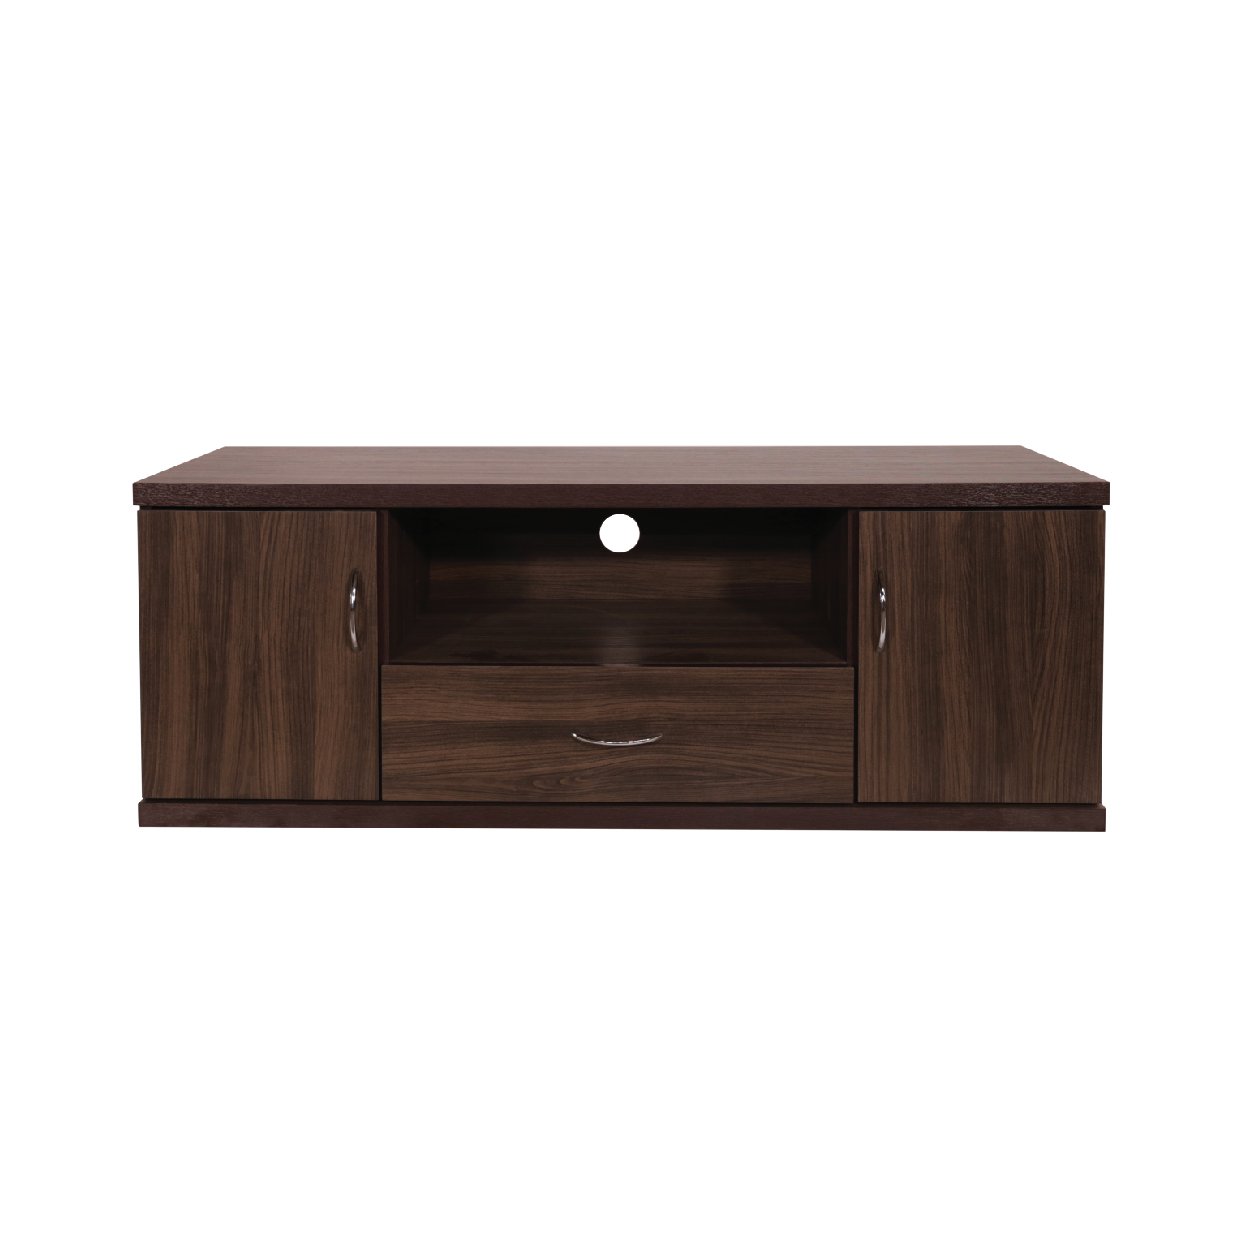 OAKES TV STAND